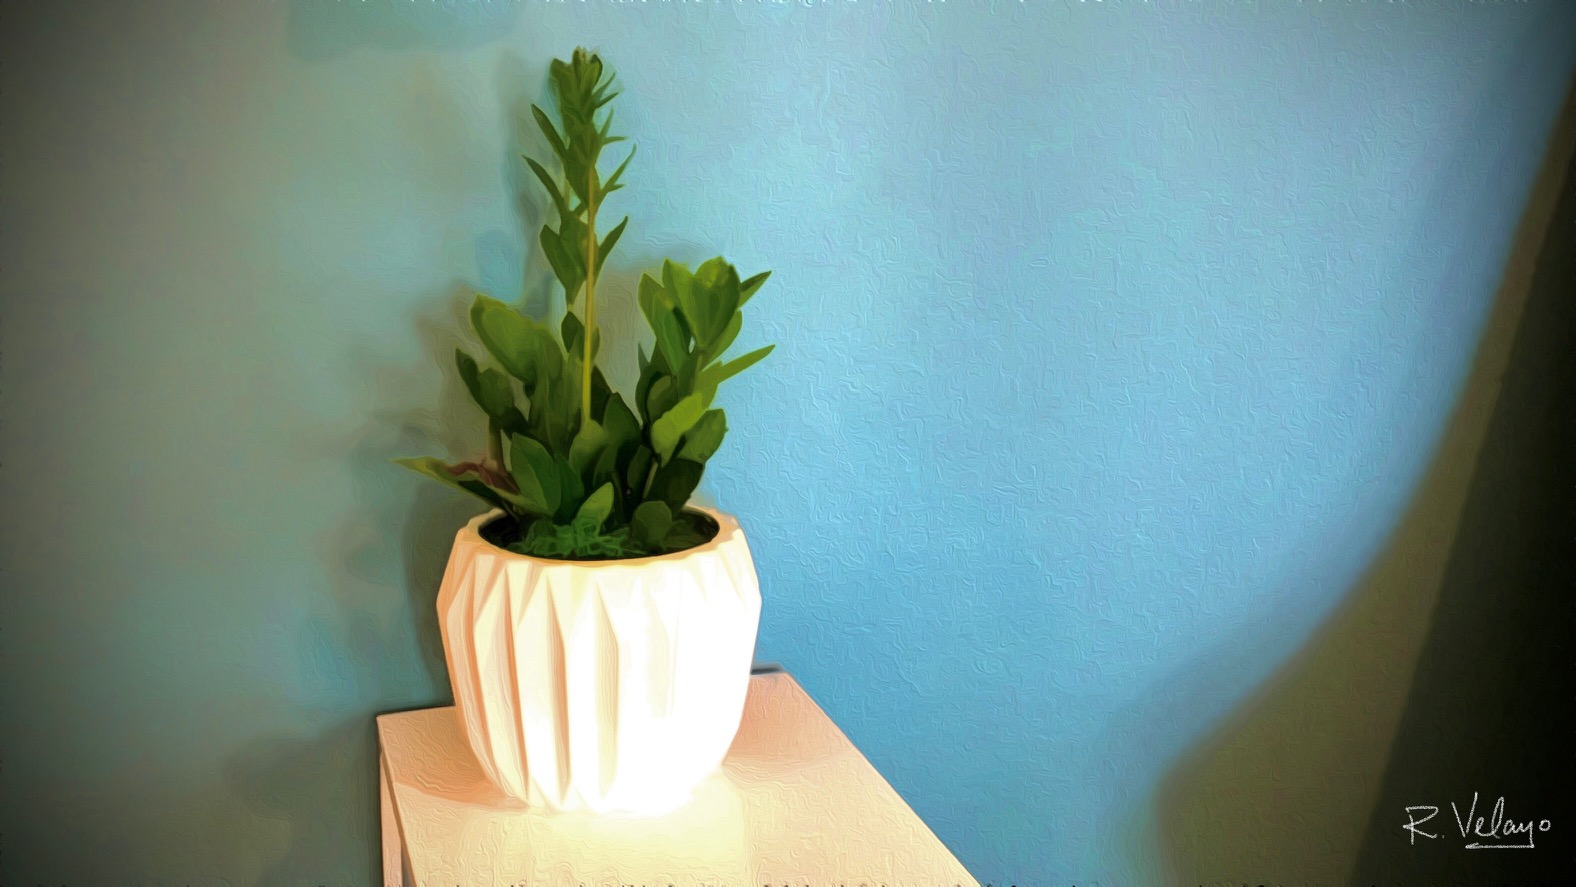 "POTTED PLANT ON A BLUE WALL" [Created: 1/18/2022]